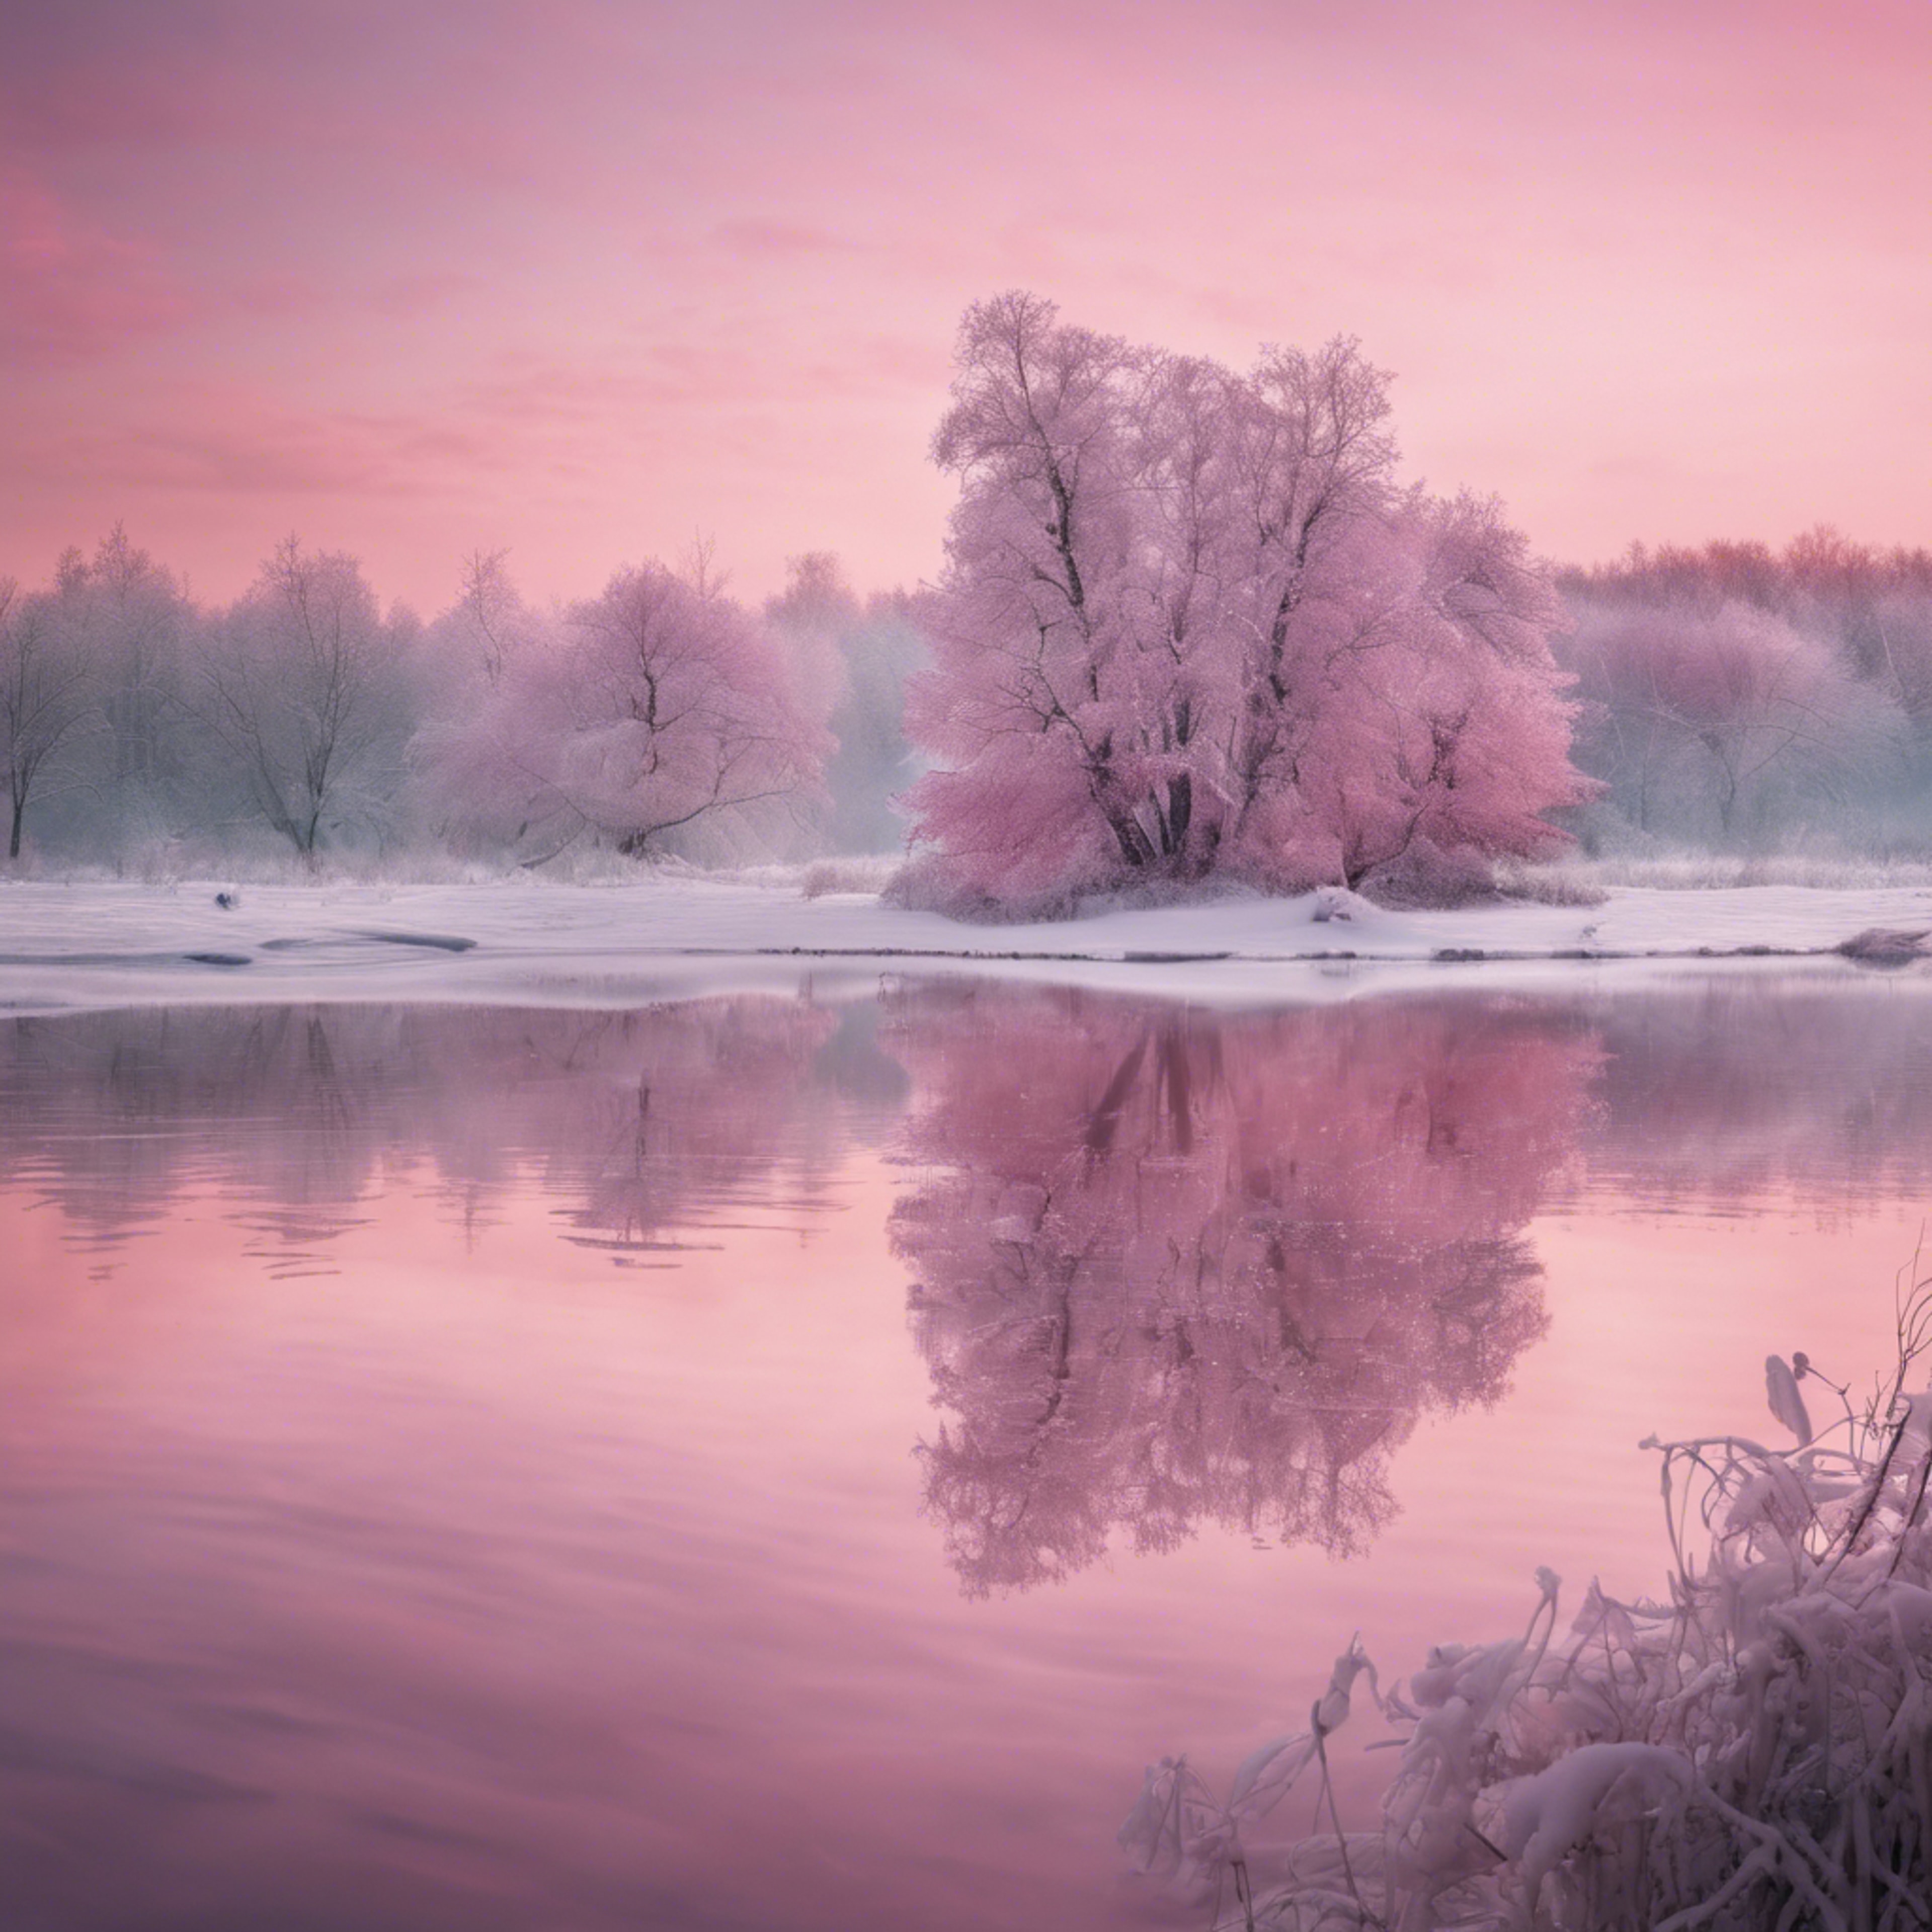 A tranquil pink Christmas morning landscape, reflections on a still frozen lake. Tapet[99be3b4566ac4908b7ca]